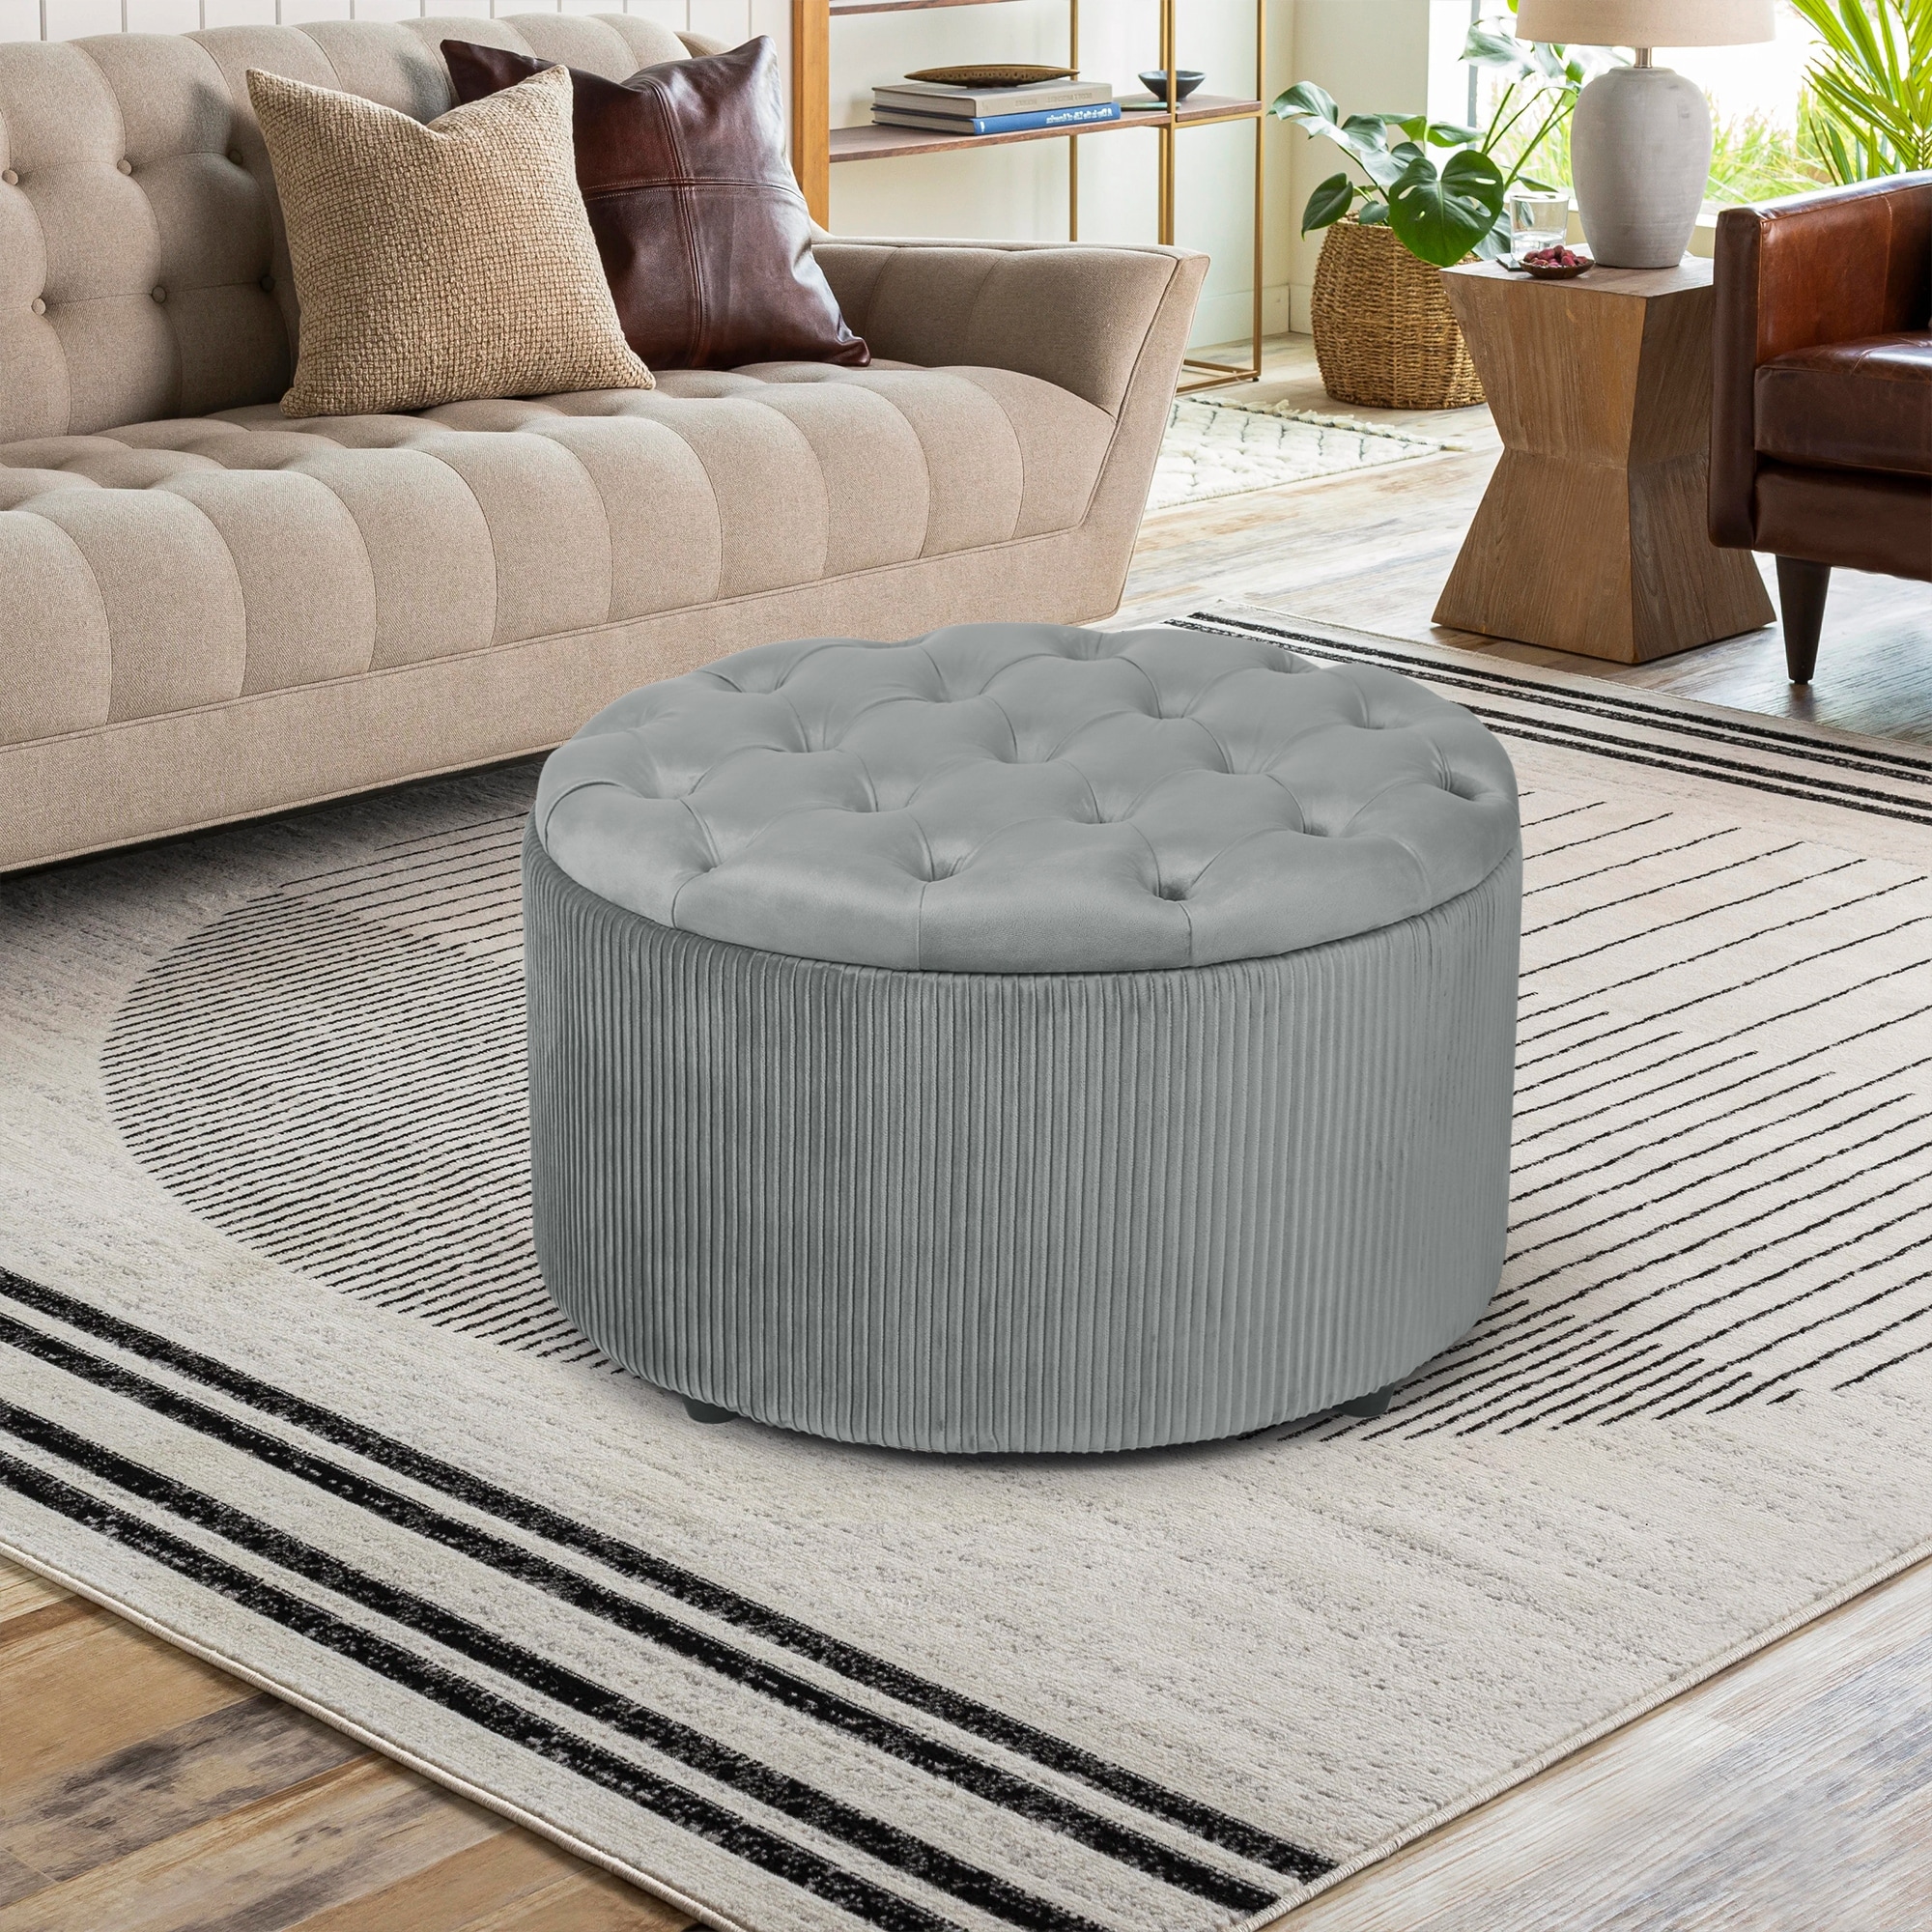 https://ak1.ostkcdn.com/images/products/is/images/direct/9fc52b529a3d393920b6a96c529d0910d9475969/Adeco-Round-Storage-Ottoman-Button-Tufted-Footrest-Stool-Bench.jpg